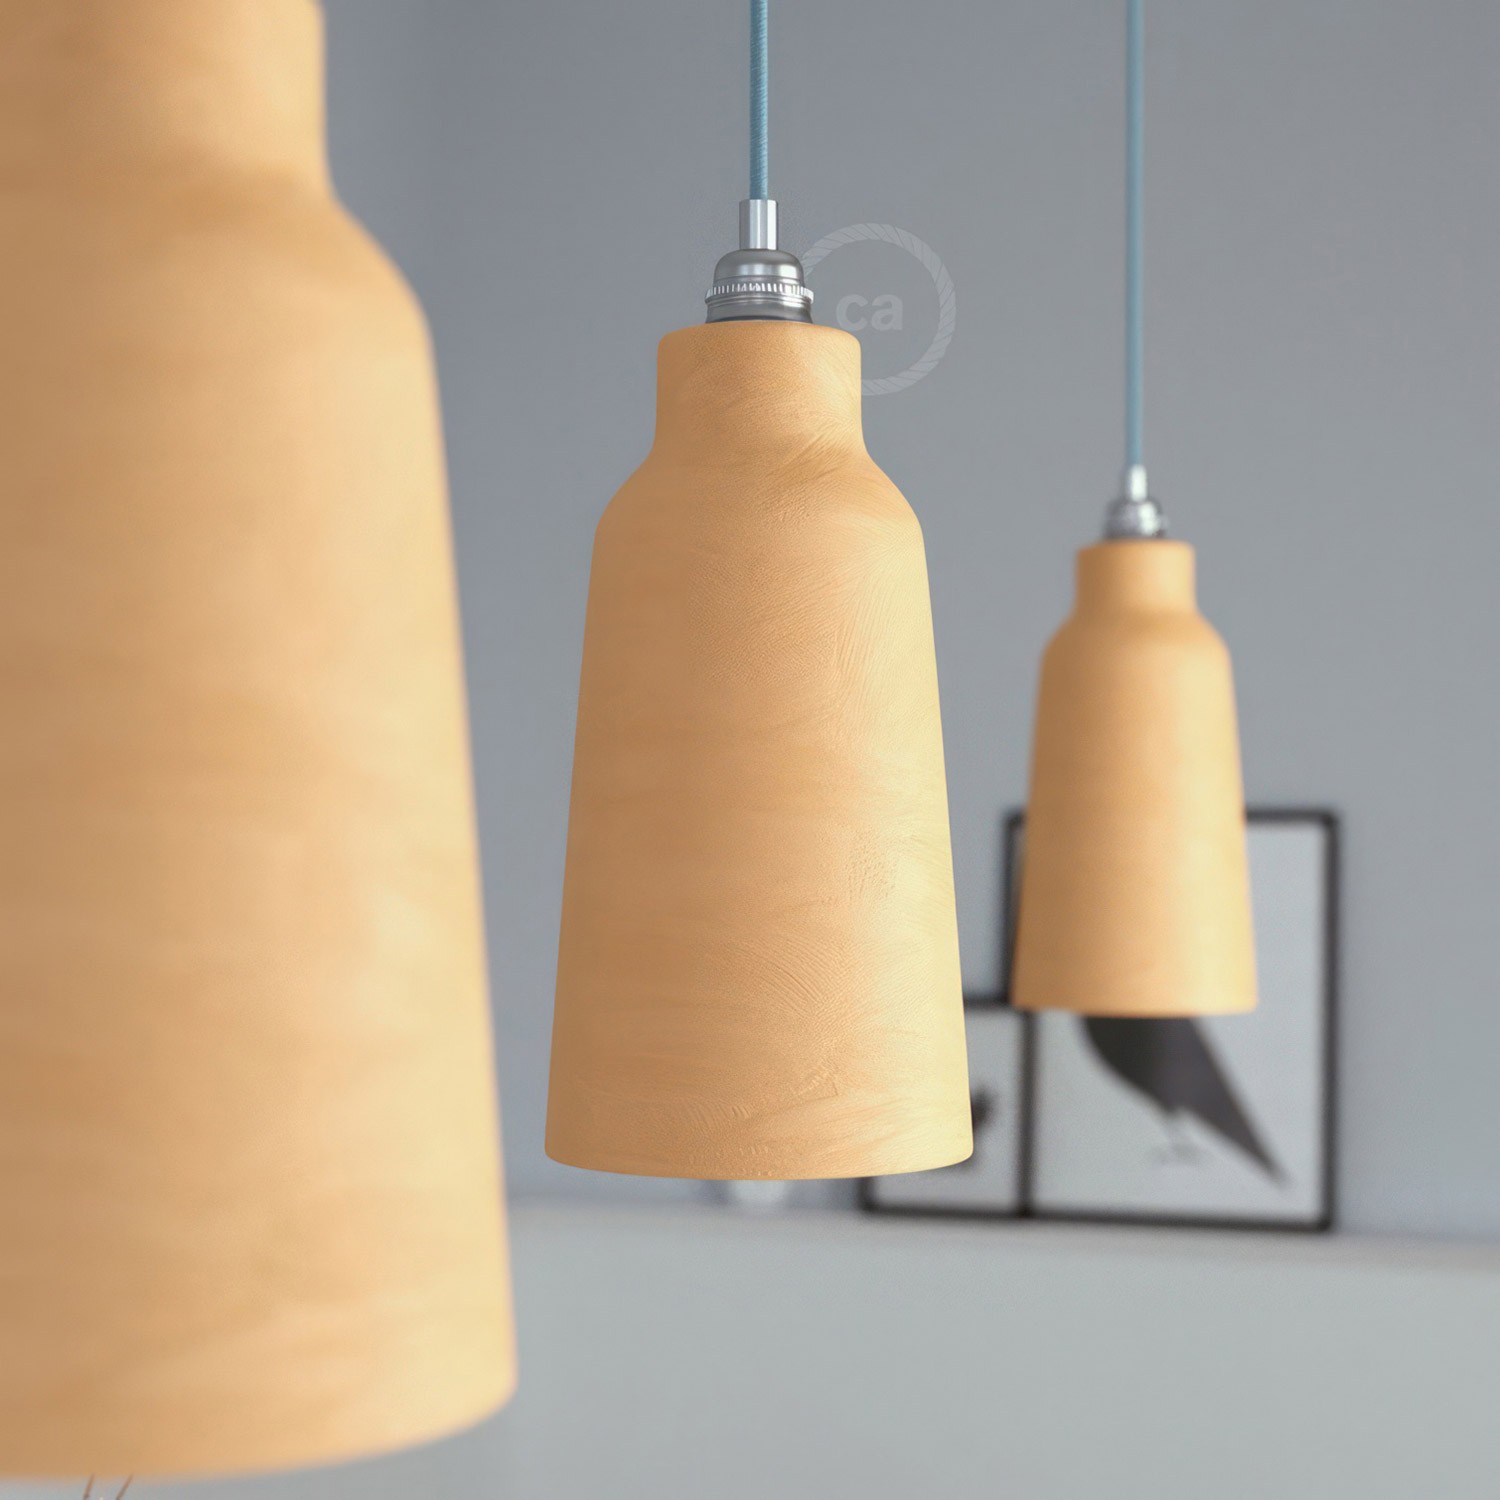 Pendant lamp with textile cable, Bottle ceramic lampshade and metal details - Made in Italy - Bulb included